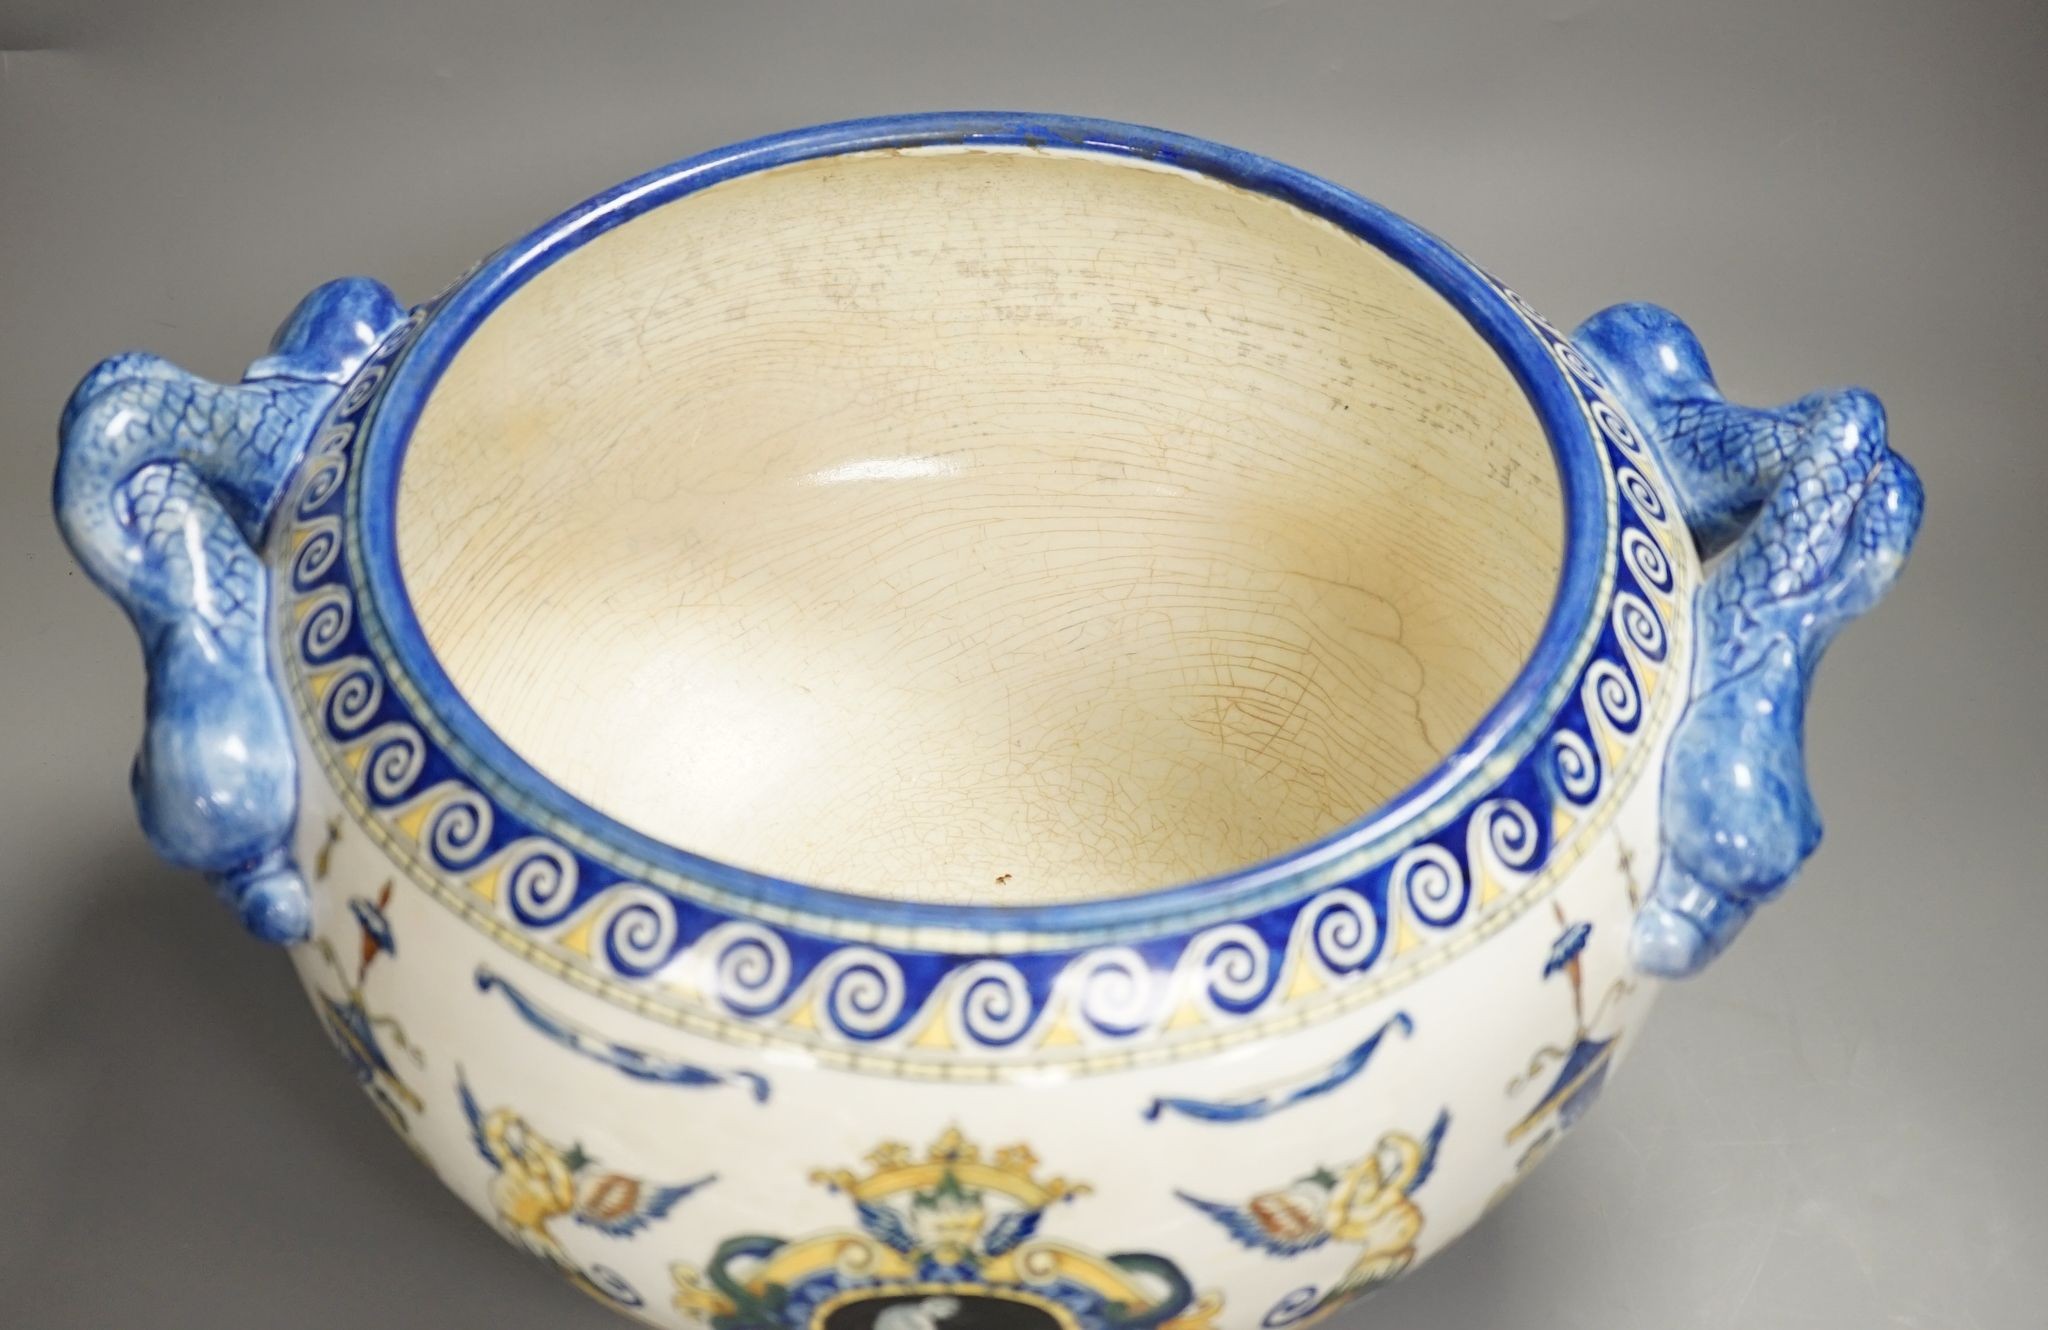 A French 19th century Gien pottery jardiniere with dolphin handles, 41 cms wide including handles.